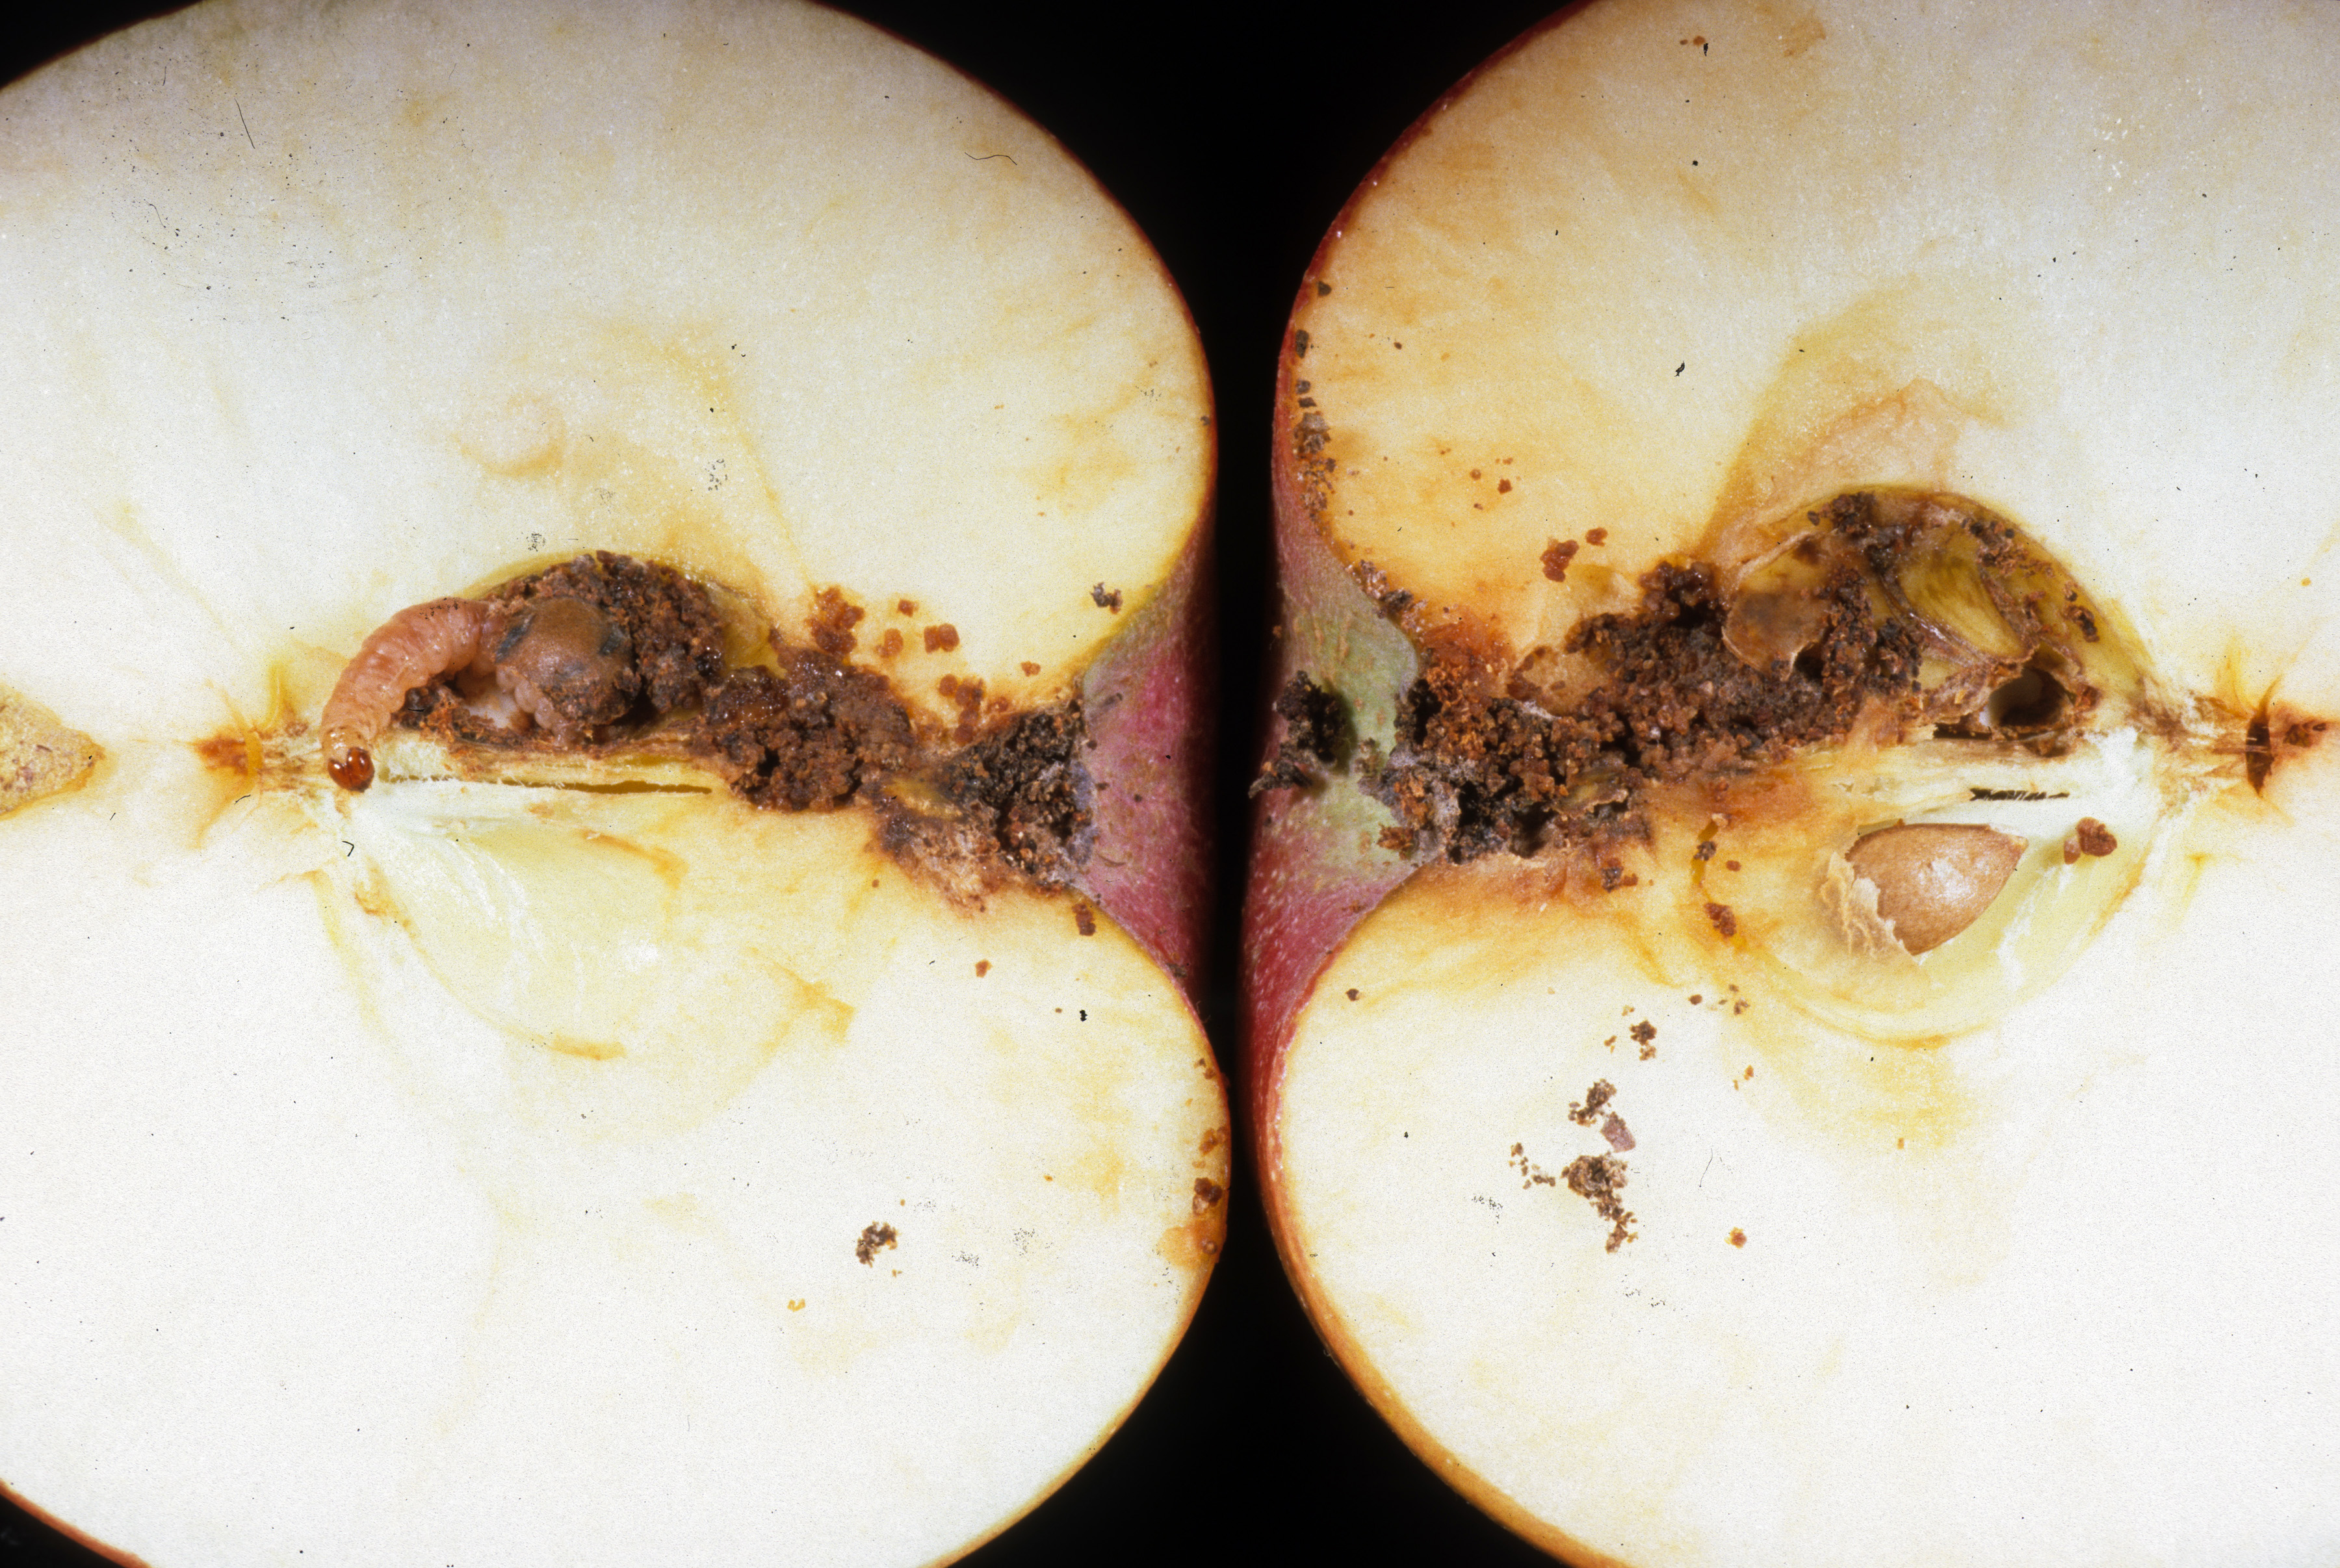 Figure 16. A mature apple cut in half to reveal a codling moth caterpillar and its feeding damage and frass at the core of the fruit. (<em>Photo credit: John Obermeyer, Purdue Entomology</em>)